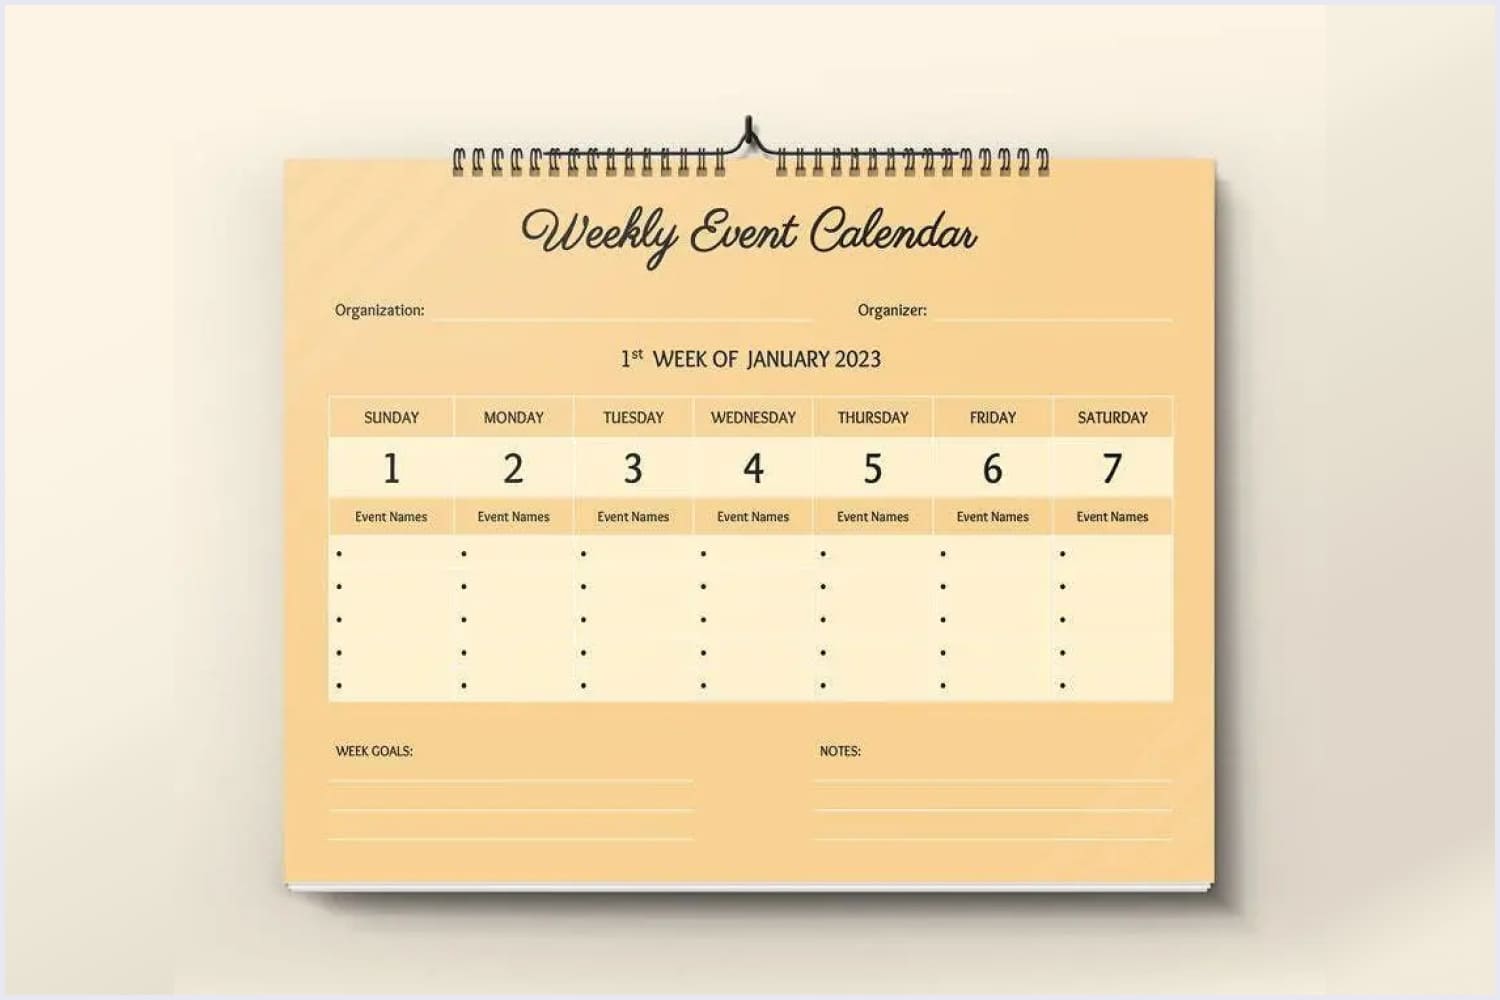 Weekly calendar in the form of a sheet with blocks of days and a place for recording events.